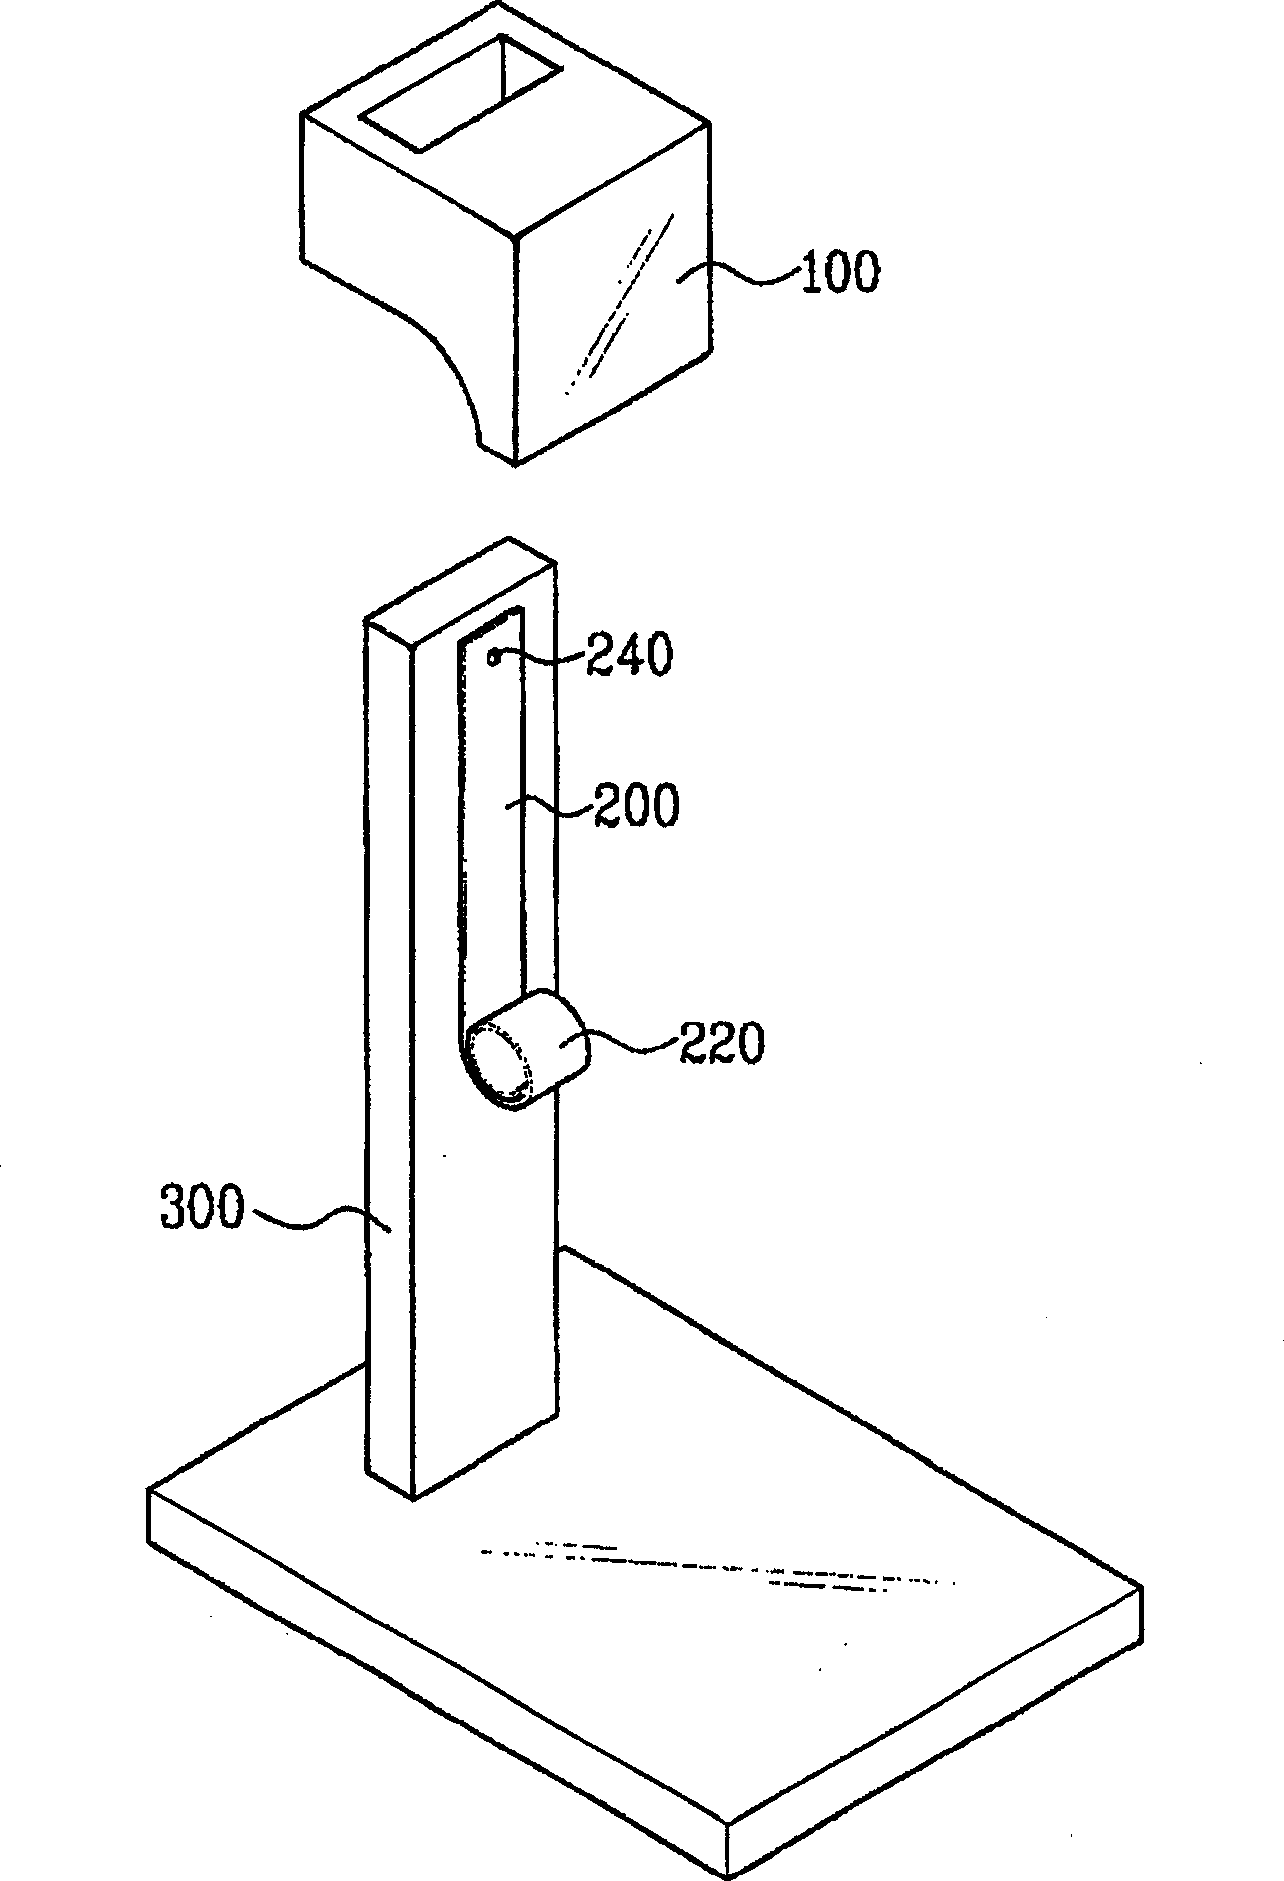 Rack stand in use for display devices